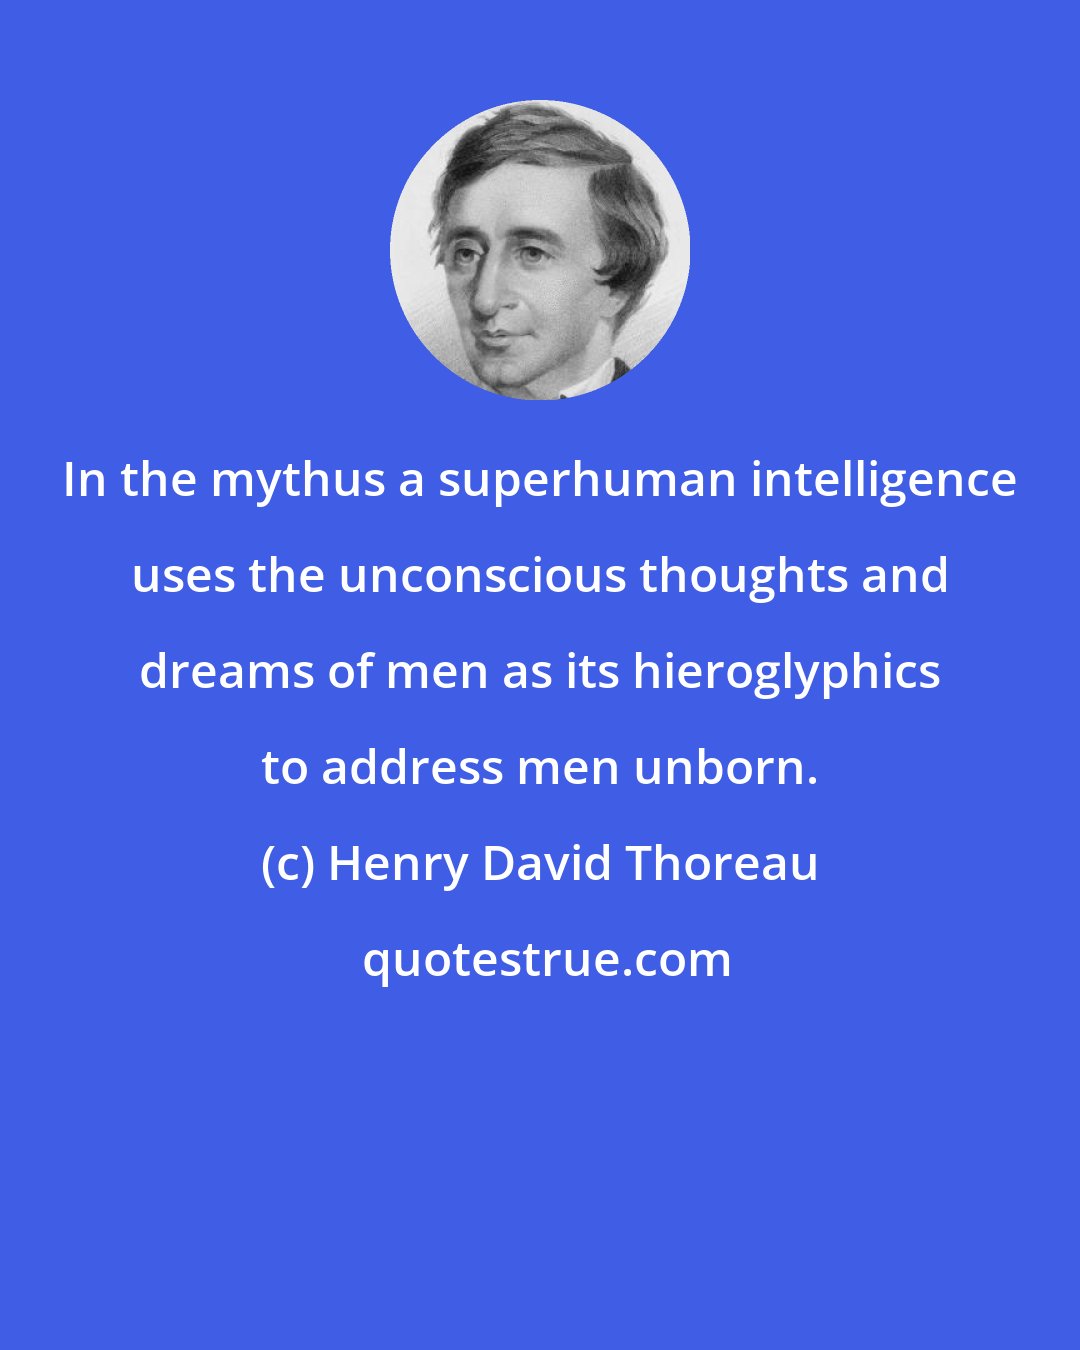 Henry David Thoreau: In the mythus a superhuman intelligence uses the unconscious thoughts and dreams of men as its hieroglyphics to address men unborn.